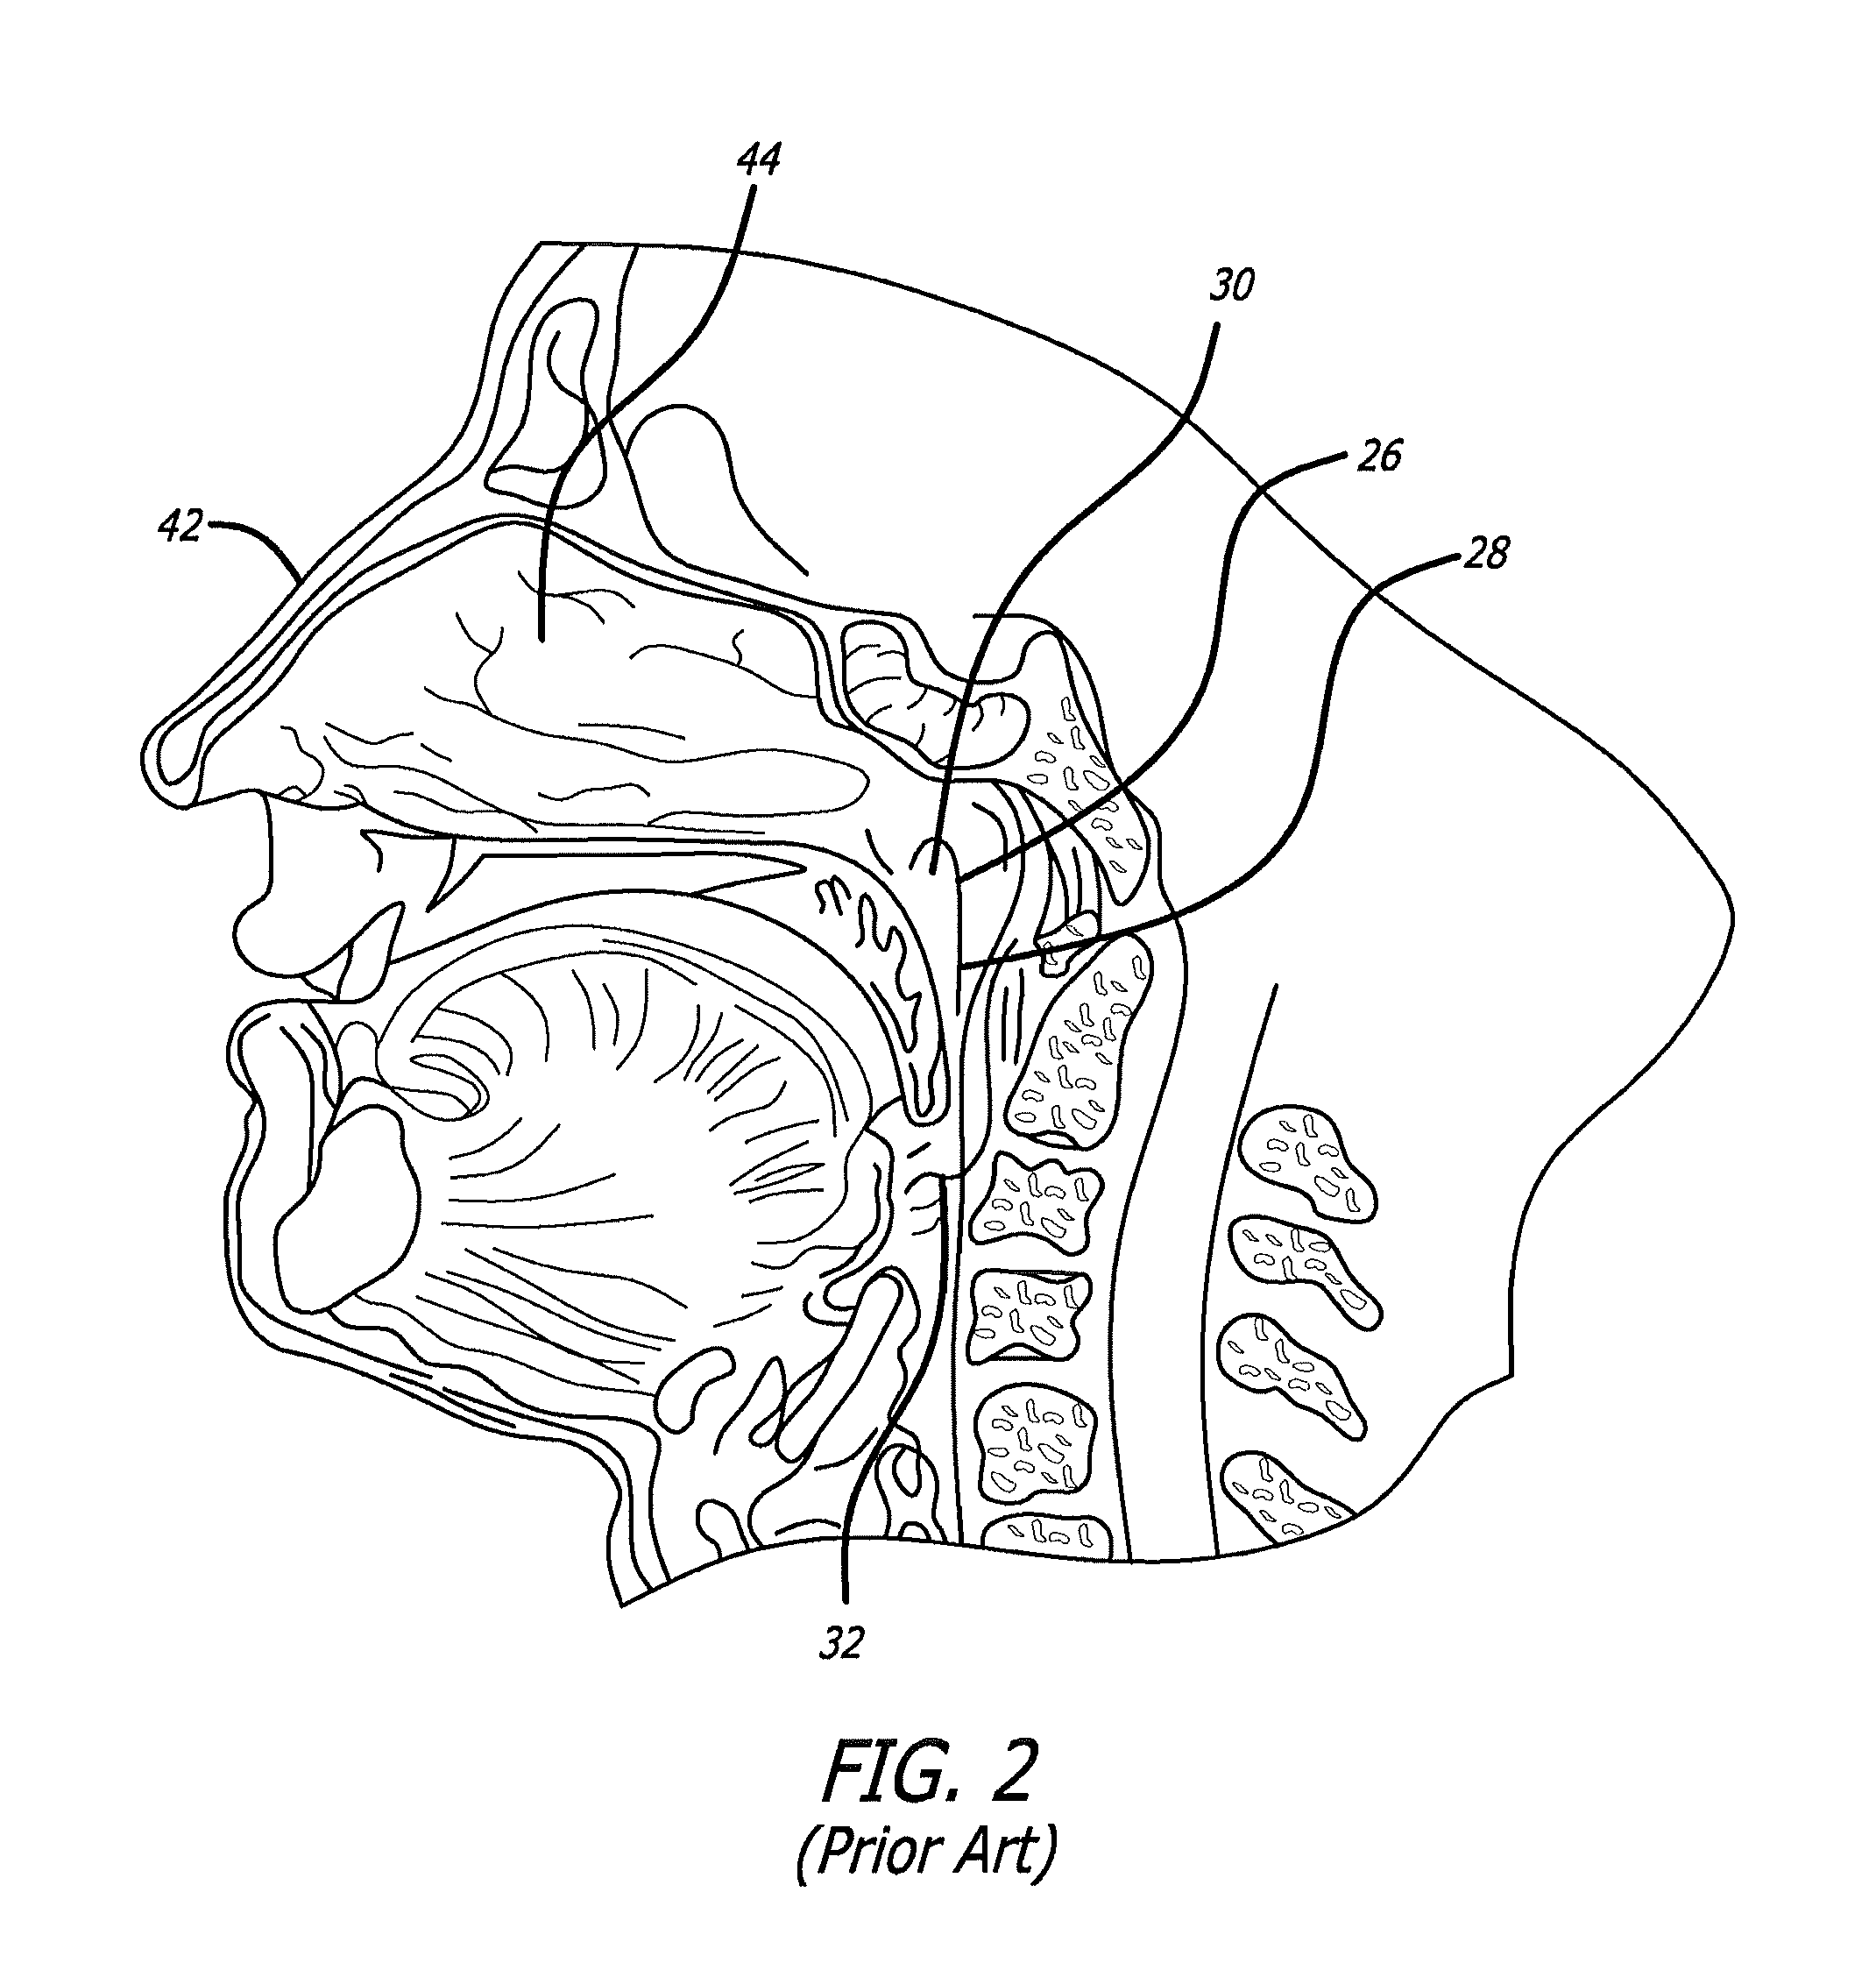 System and method for treatment of non-ventilating middle ear by providing a gas pathway through the nasopharynx